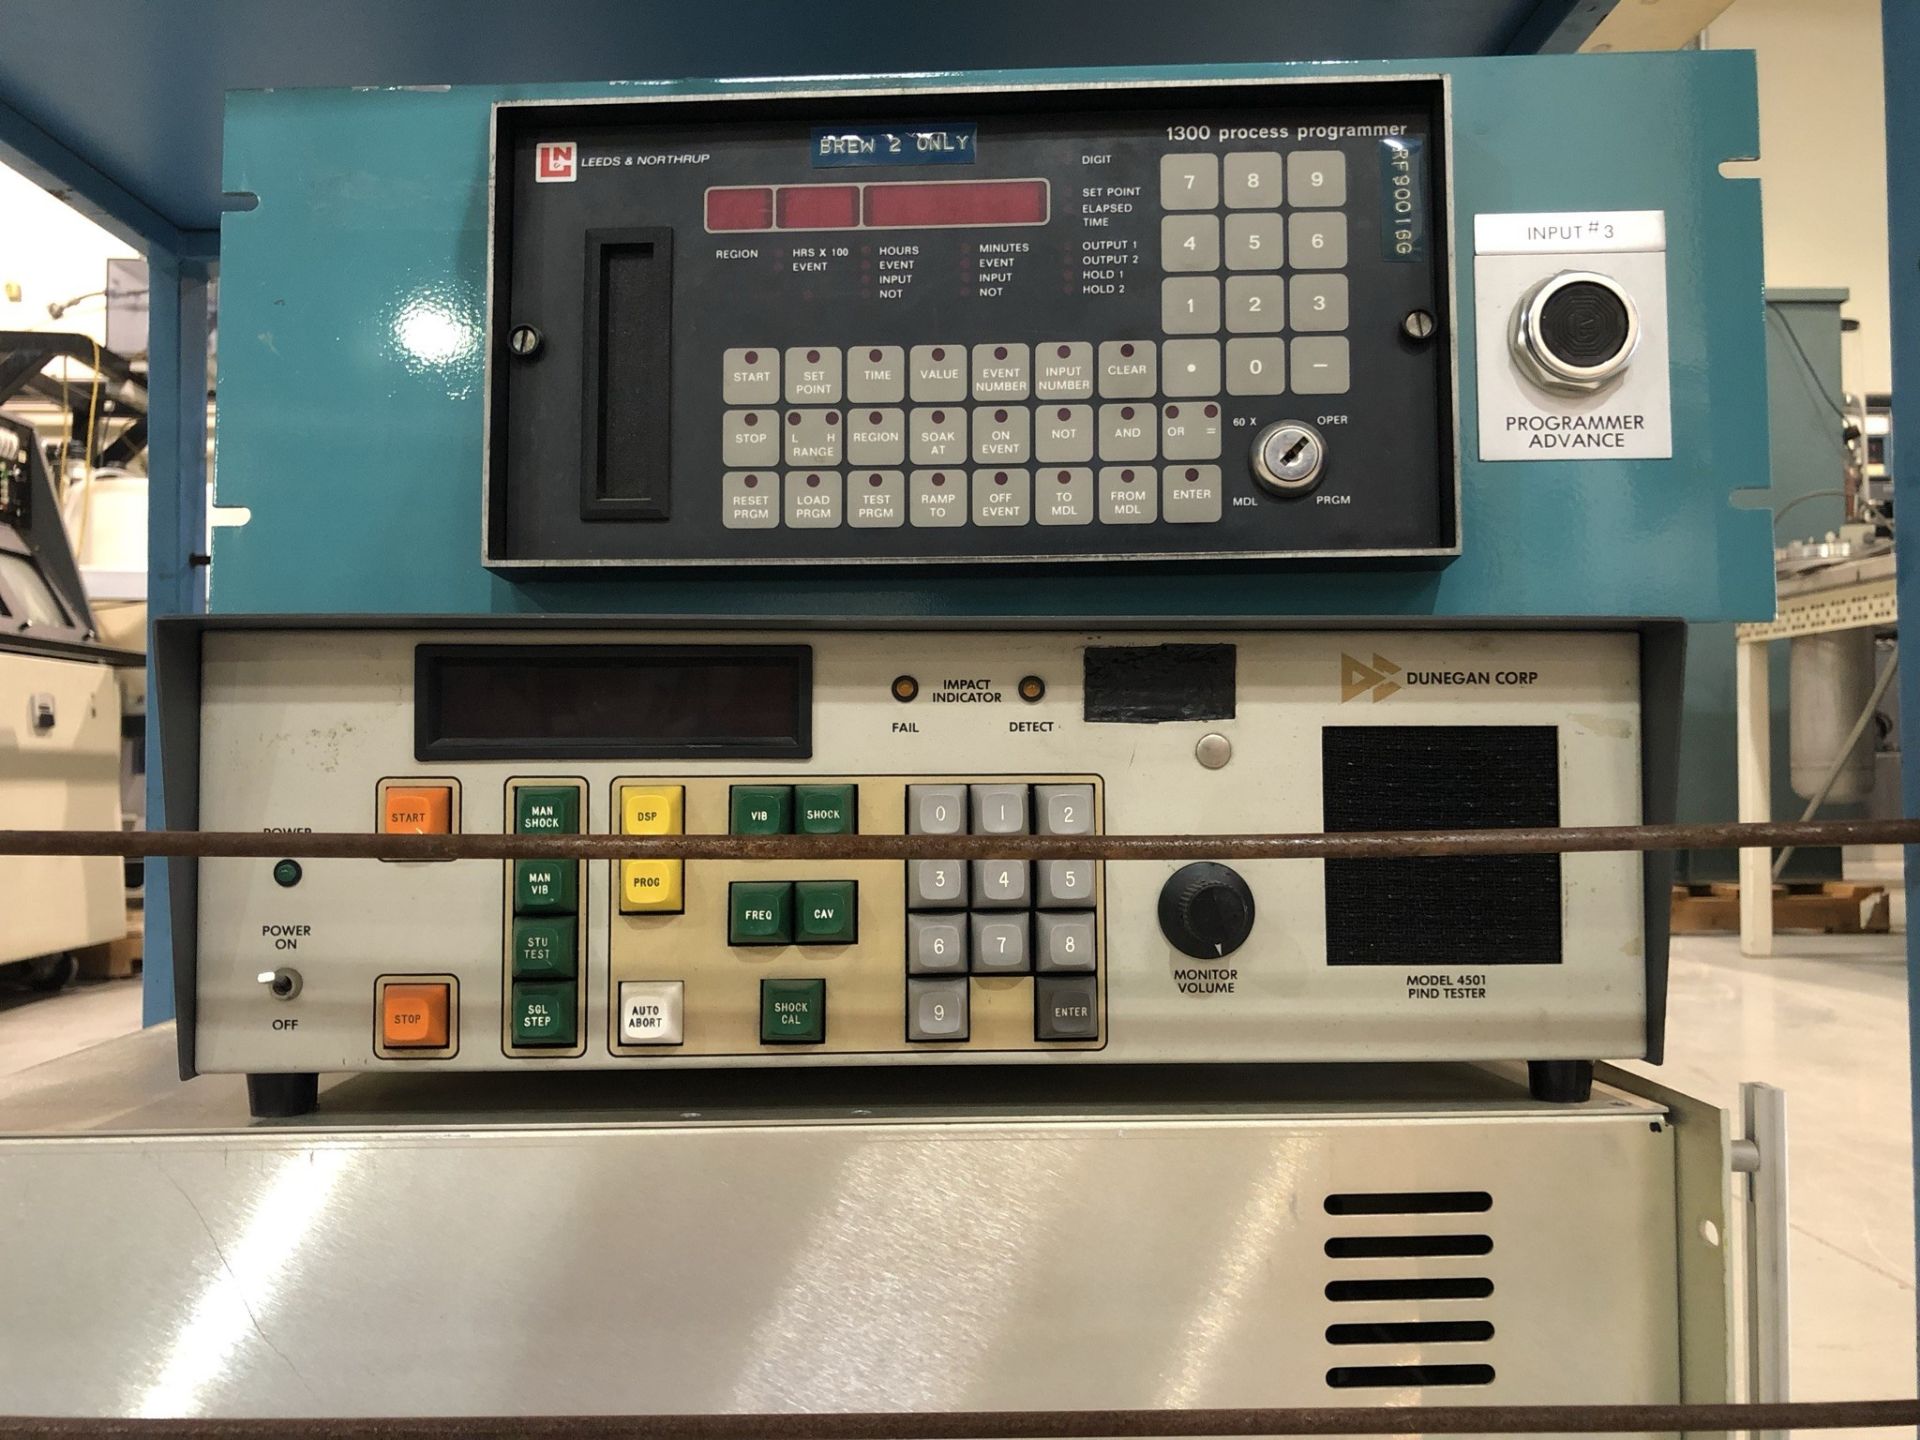 Leeds and Northrup 1300 process programmer, Dunnigan Corp Model 4501A Accelerometer, Commonwealth - Image 11 of 11